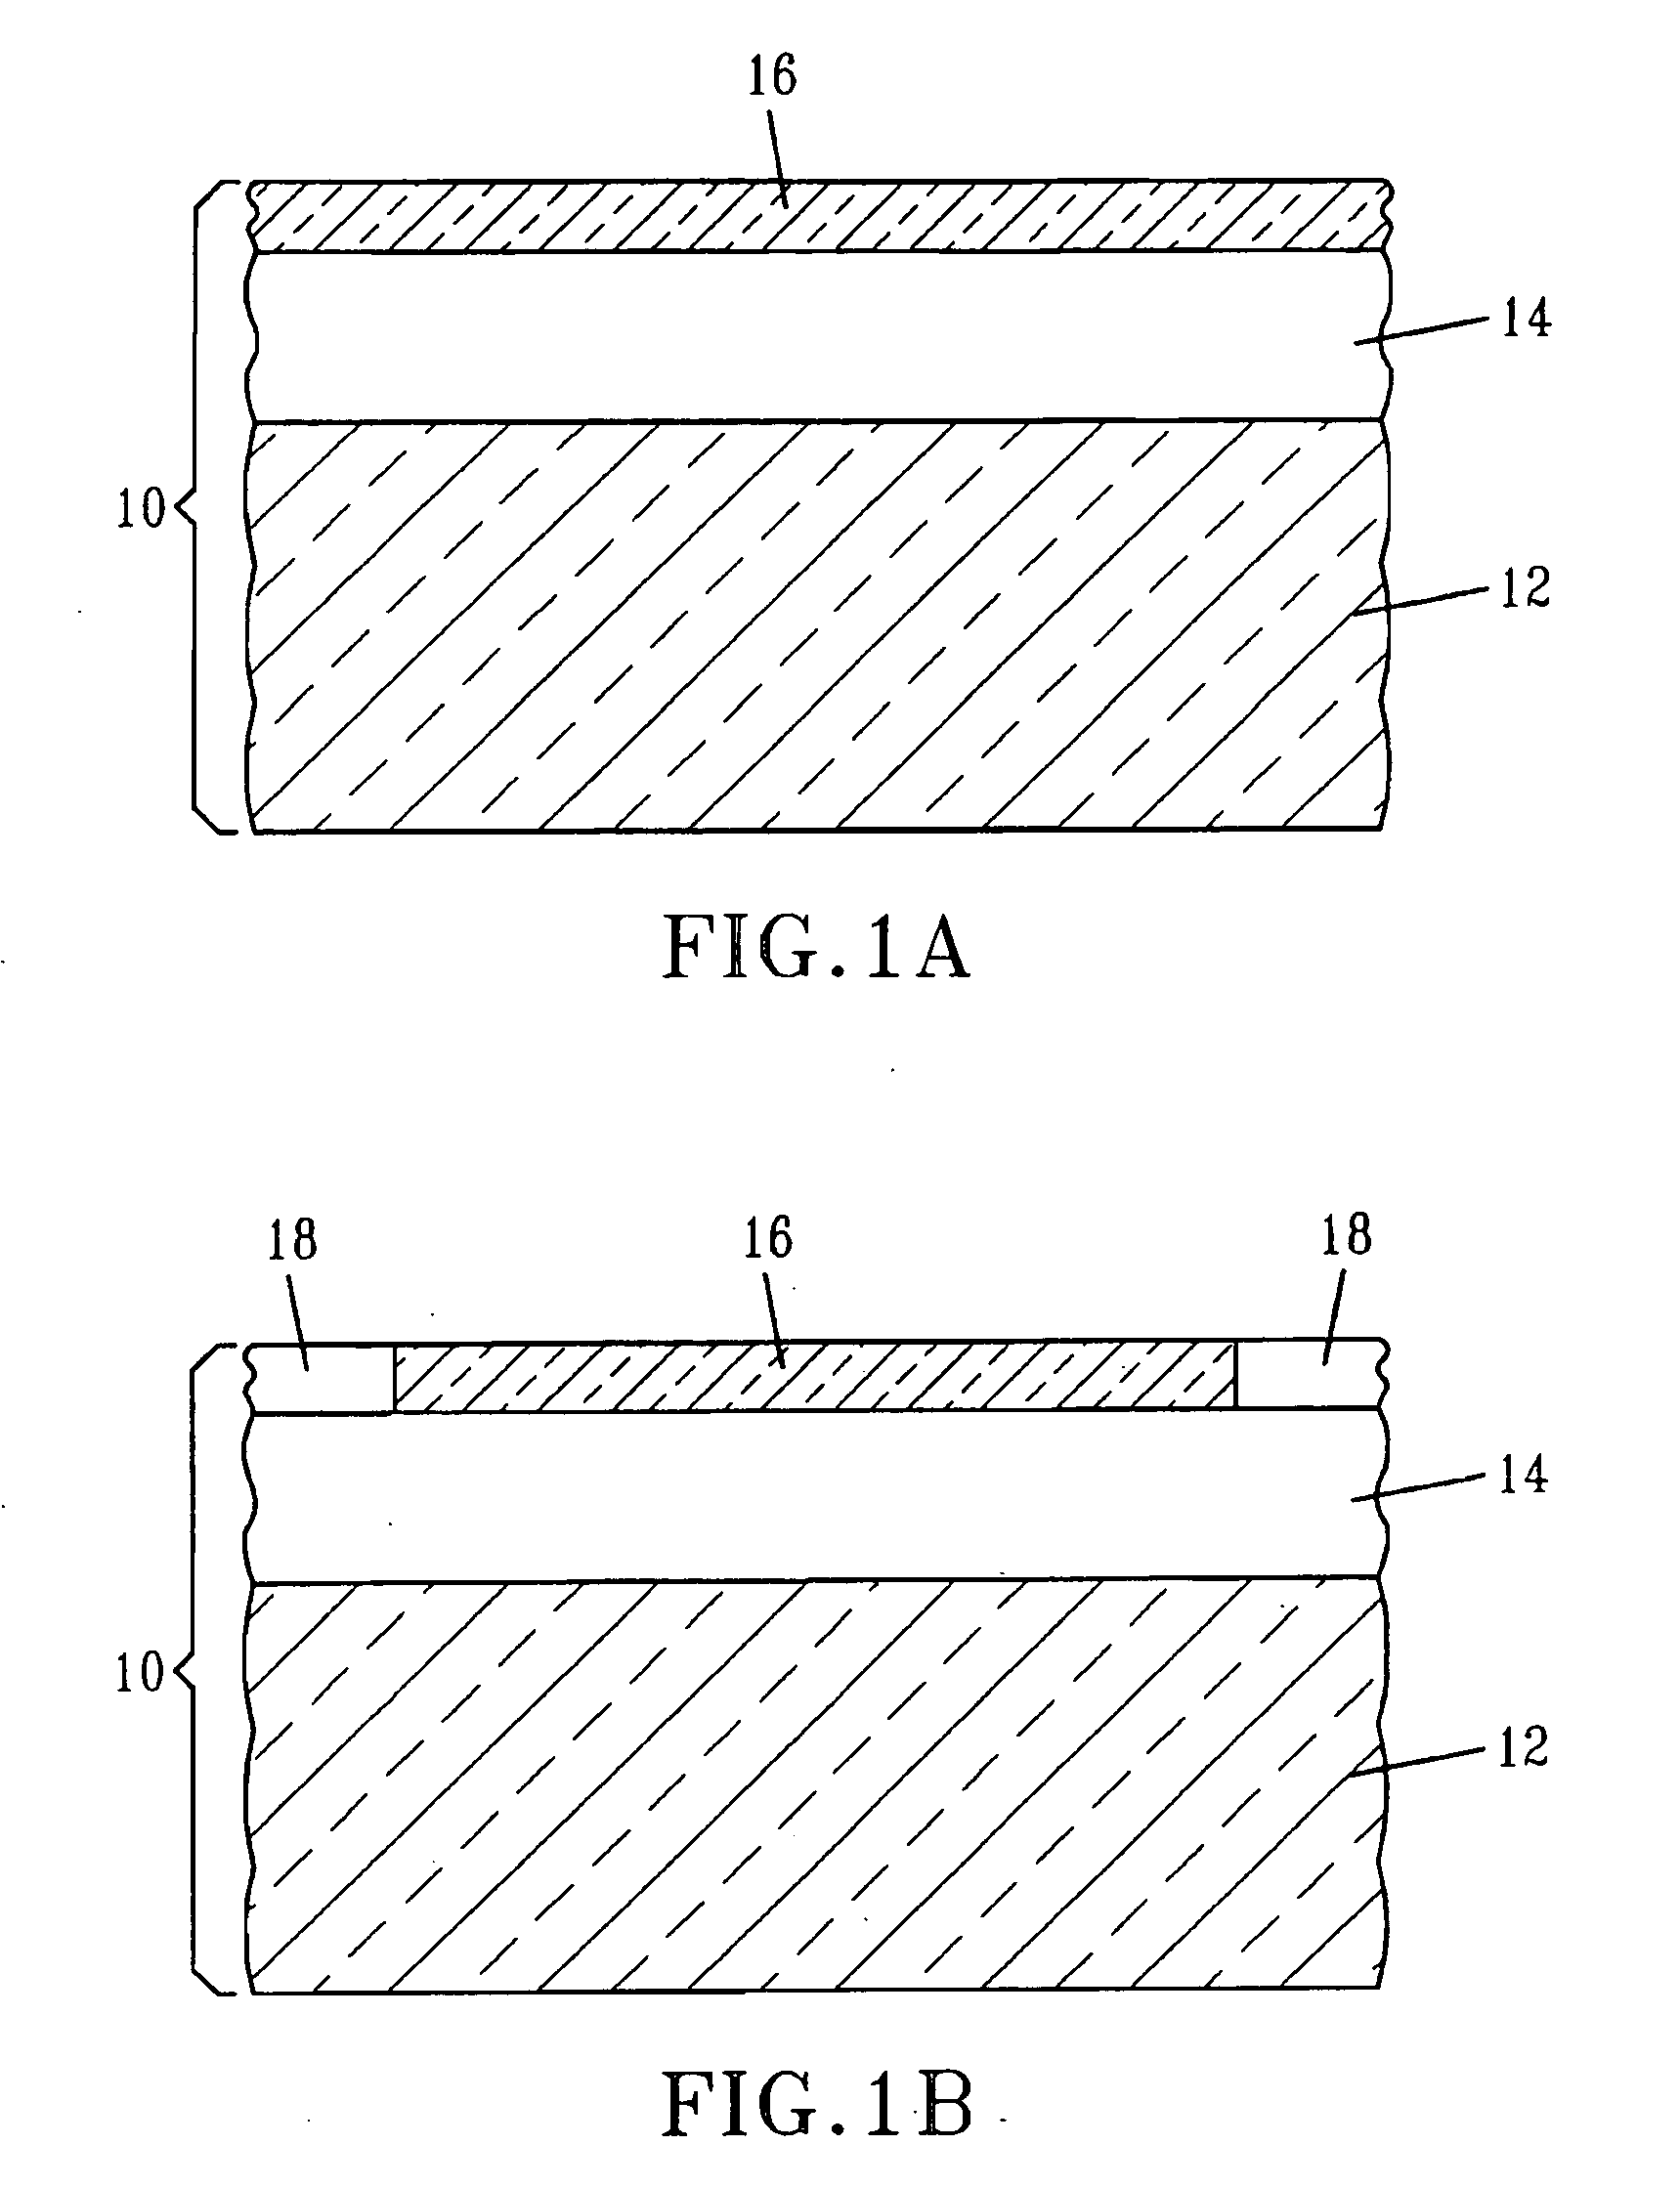 Thin silicon single diffusion field effect transistor for enhanced drive performance with stress film liners